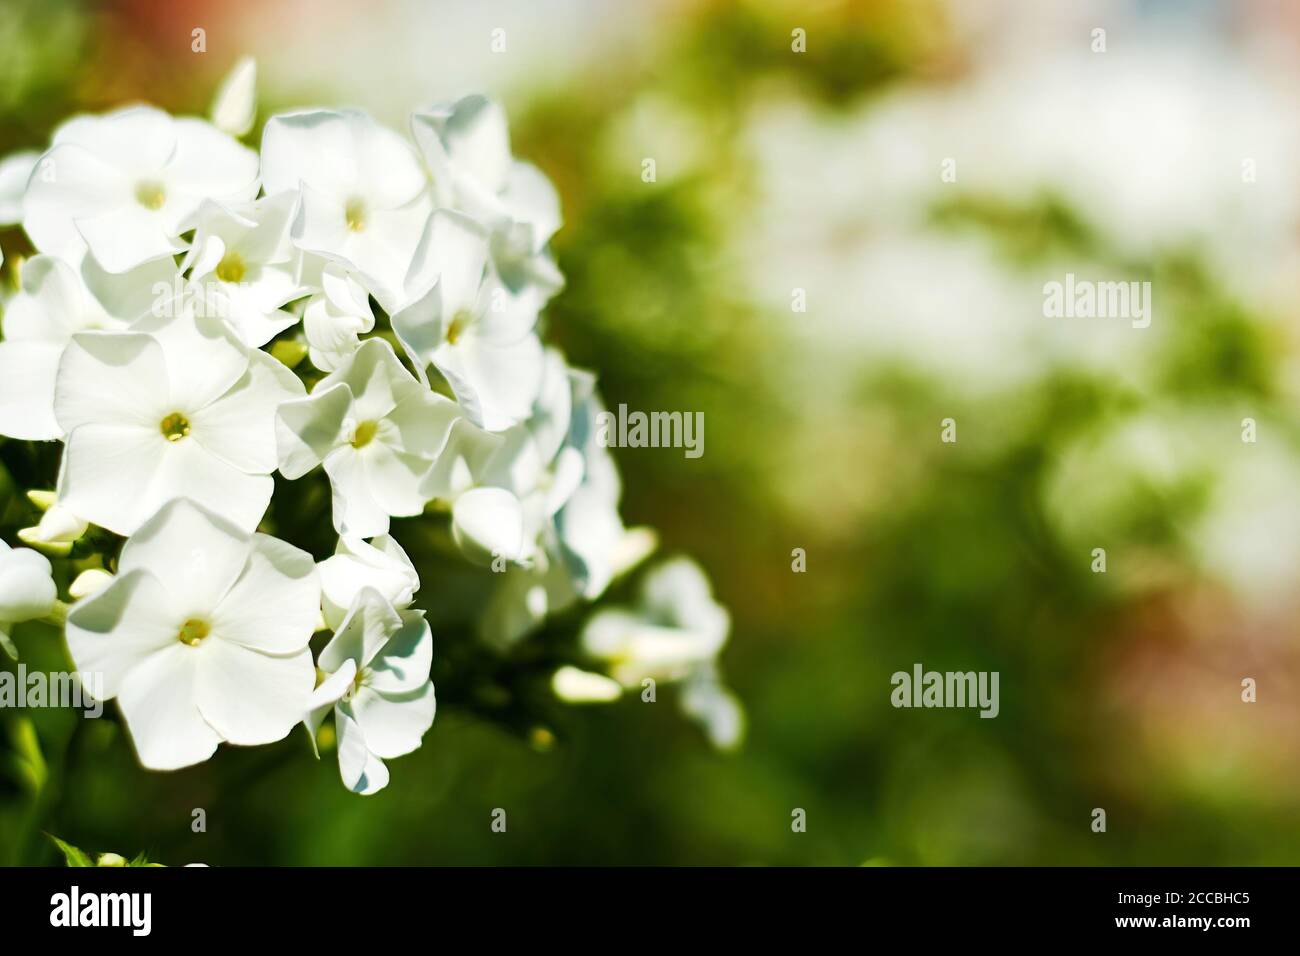 White phlox flower bush on the blurred green plants background. Floral and herbal backdrops and patterns with copy space for text Stock Photo